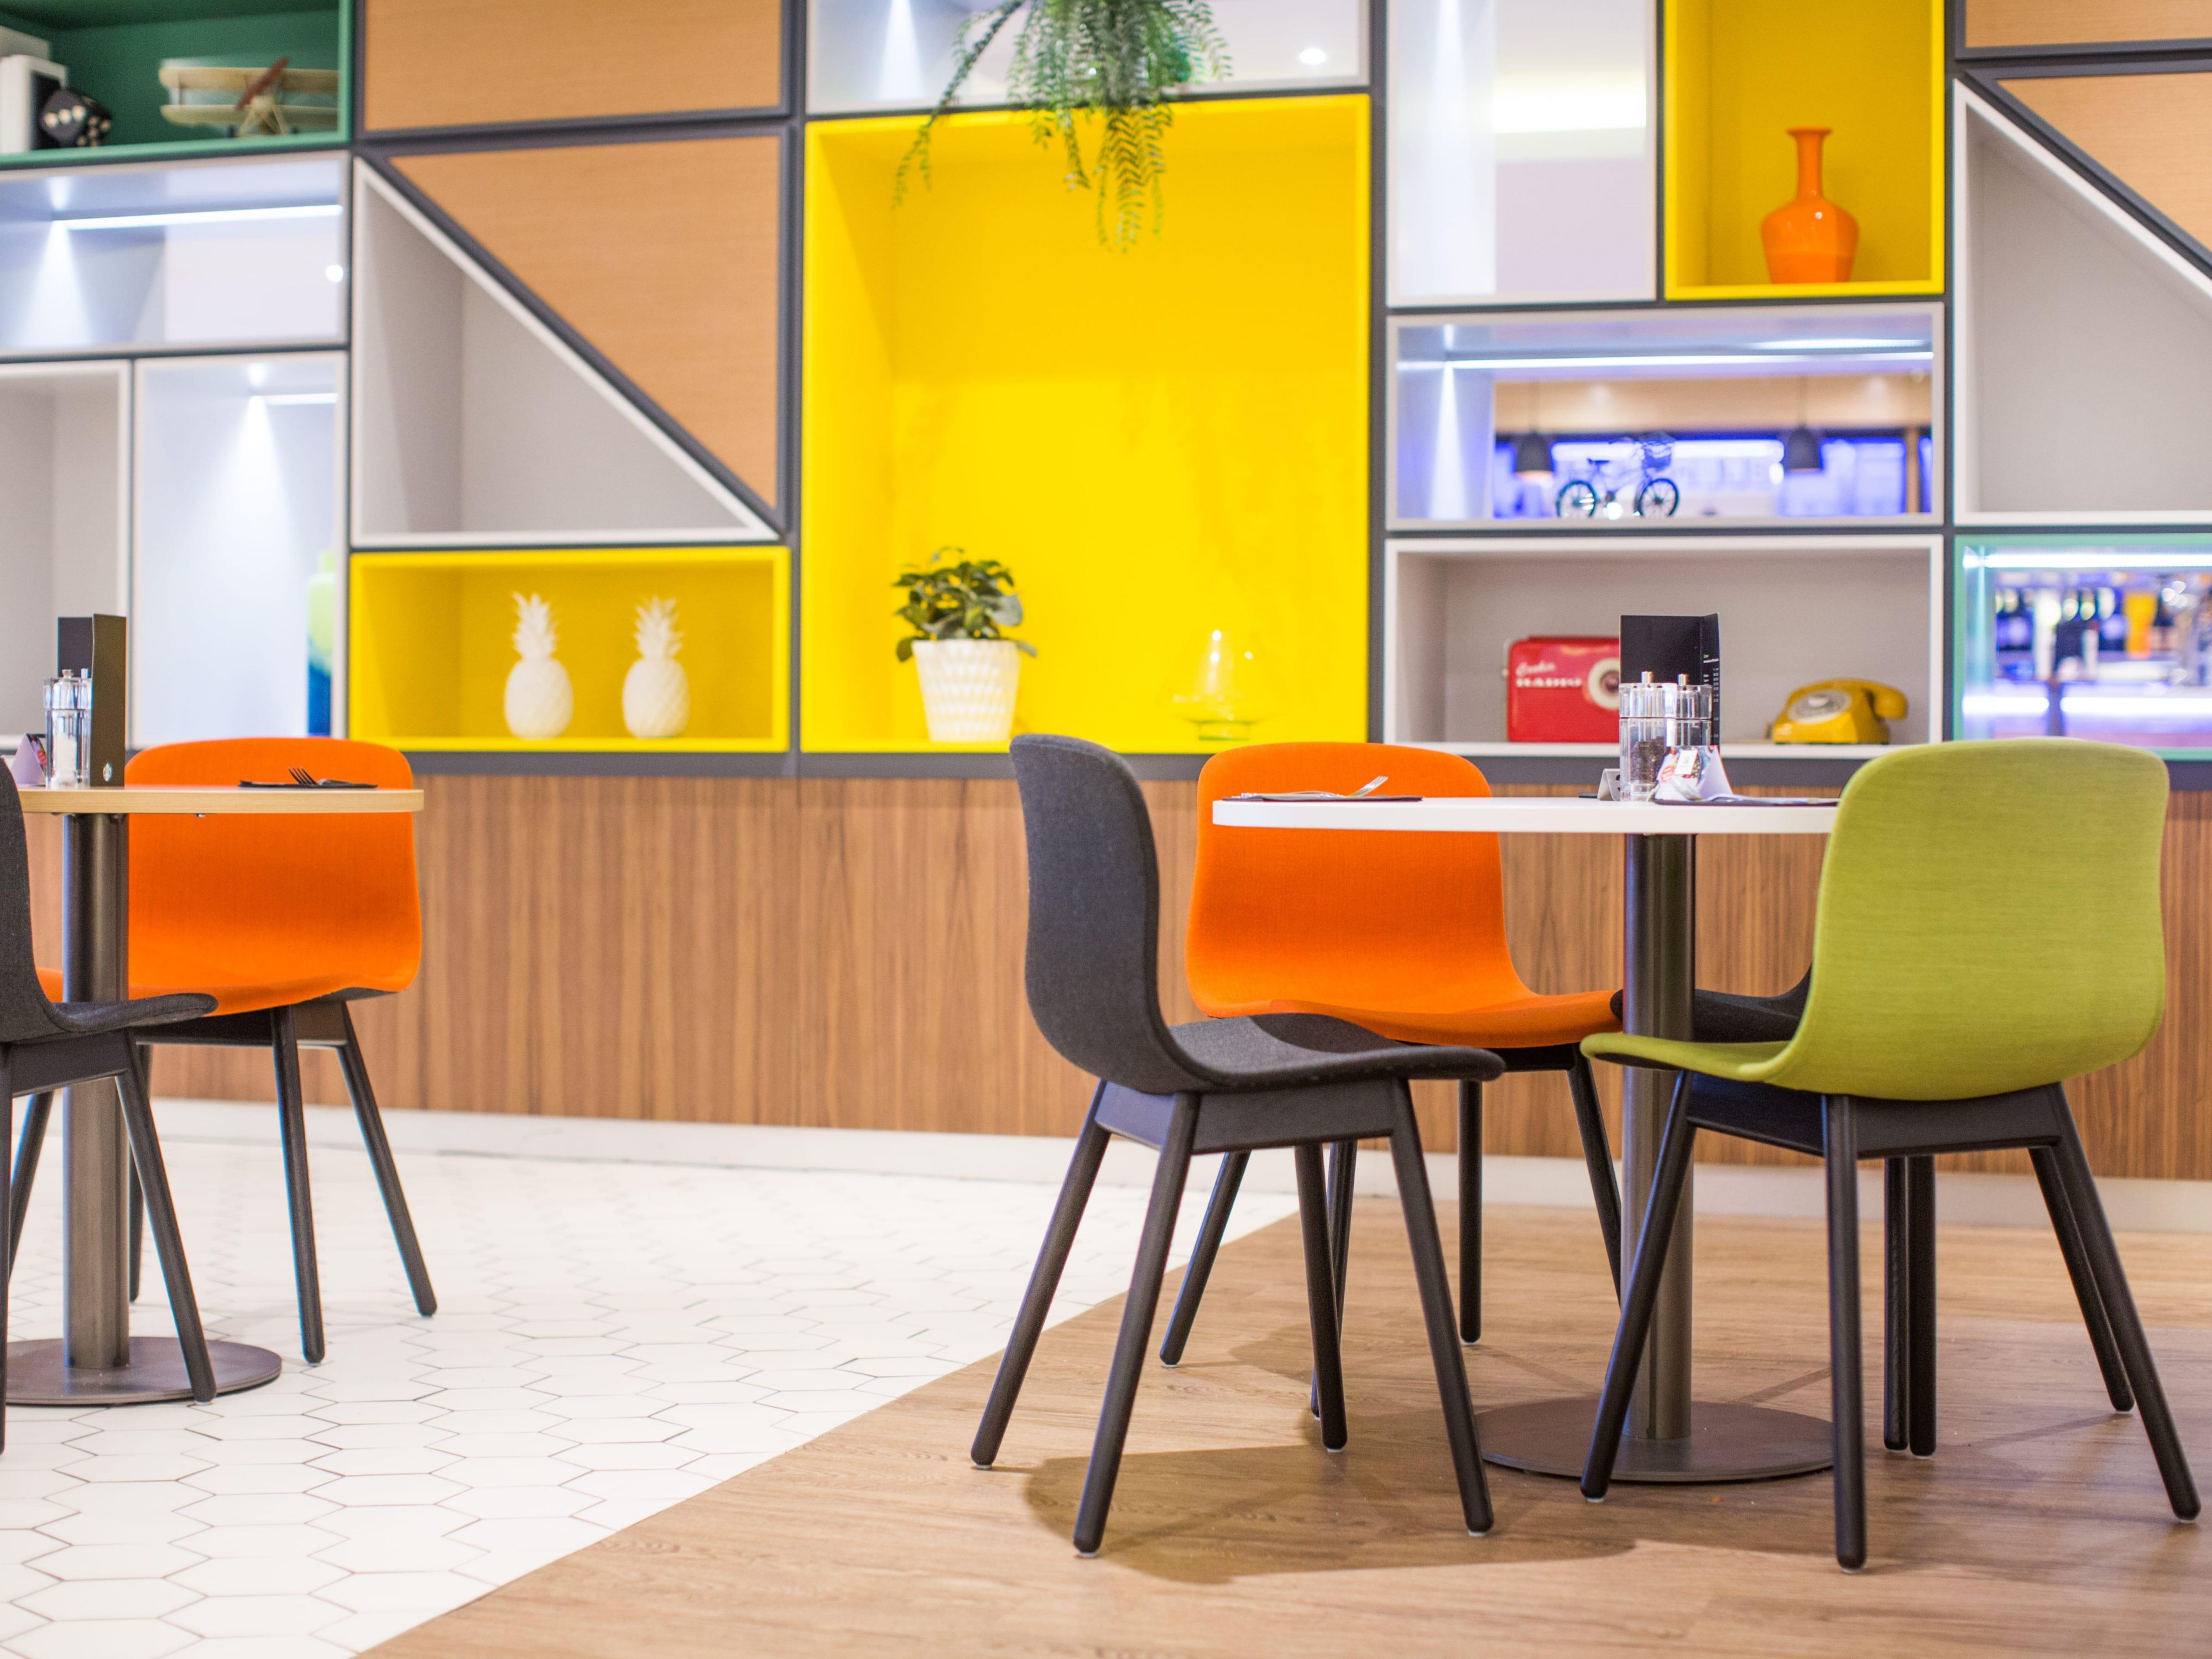 Our Open Lobby dining provides everything you could need, whether it be something from our bistro dining menu or a quick snack from the To Go Café. Eat-in or eat-out, we offer flexible dining solutions to all of our guests.